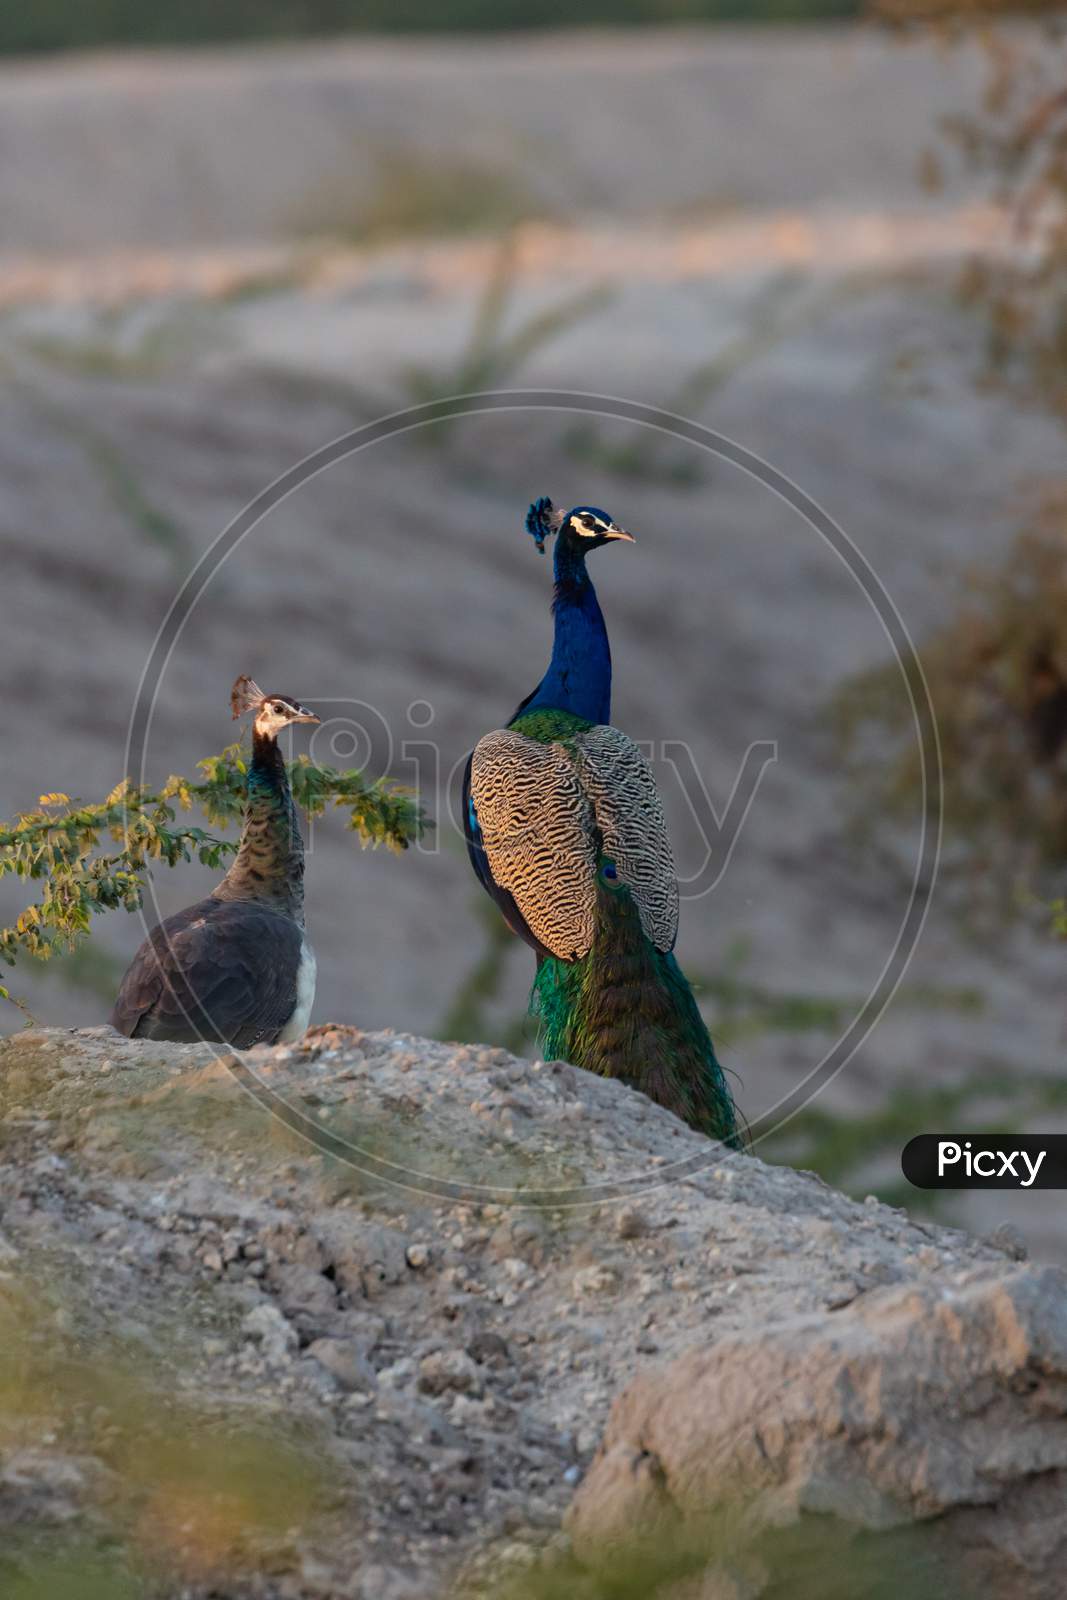 A peacock and a peahen siting on a rock